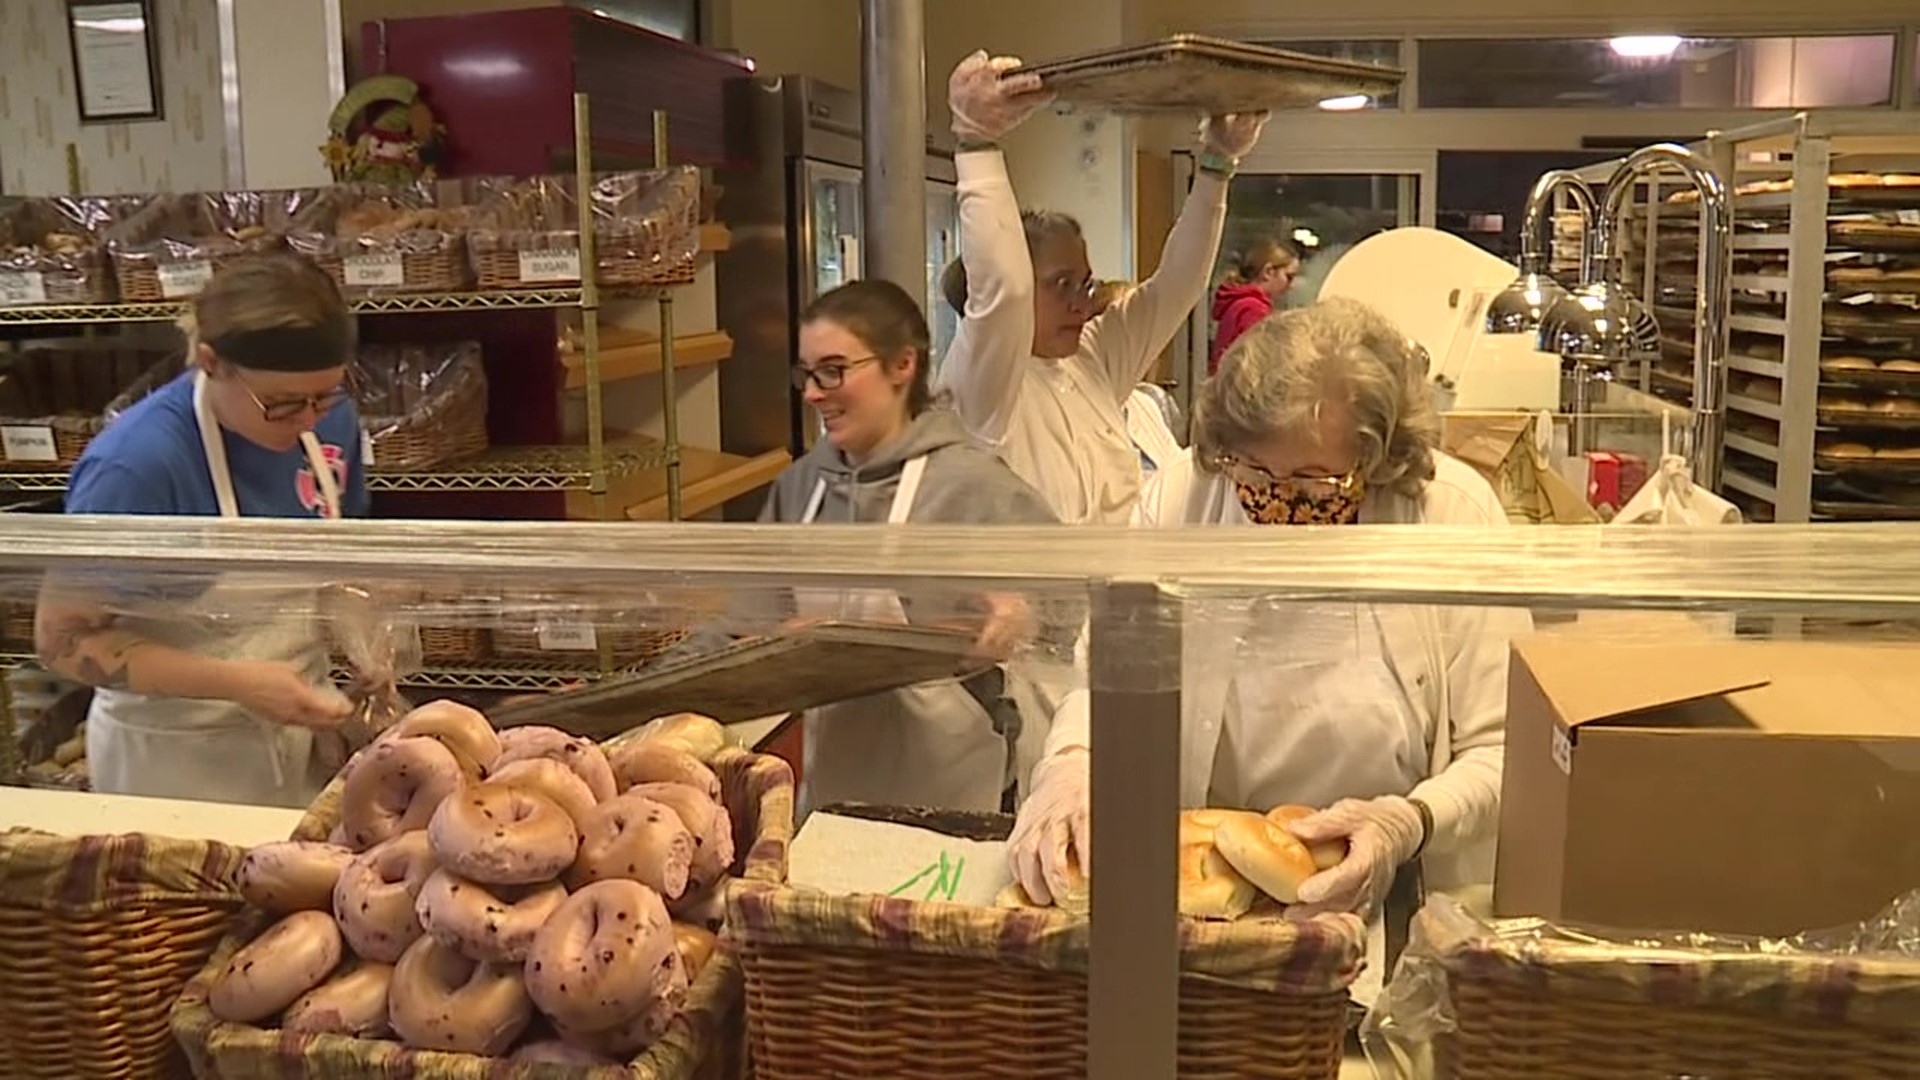 It was a hectic night and morning for bakers in Luzerne County, making sure hundreds of customers have everything they need for Thanksgiving.